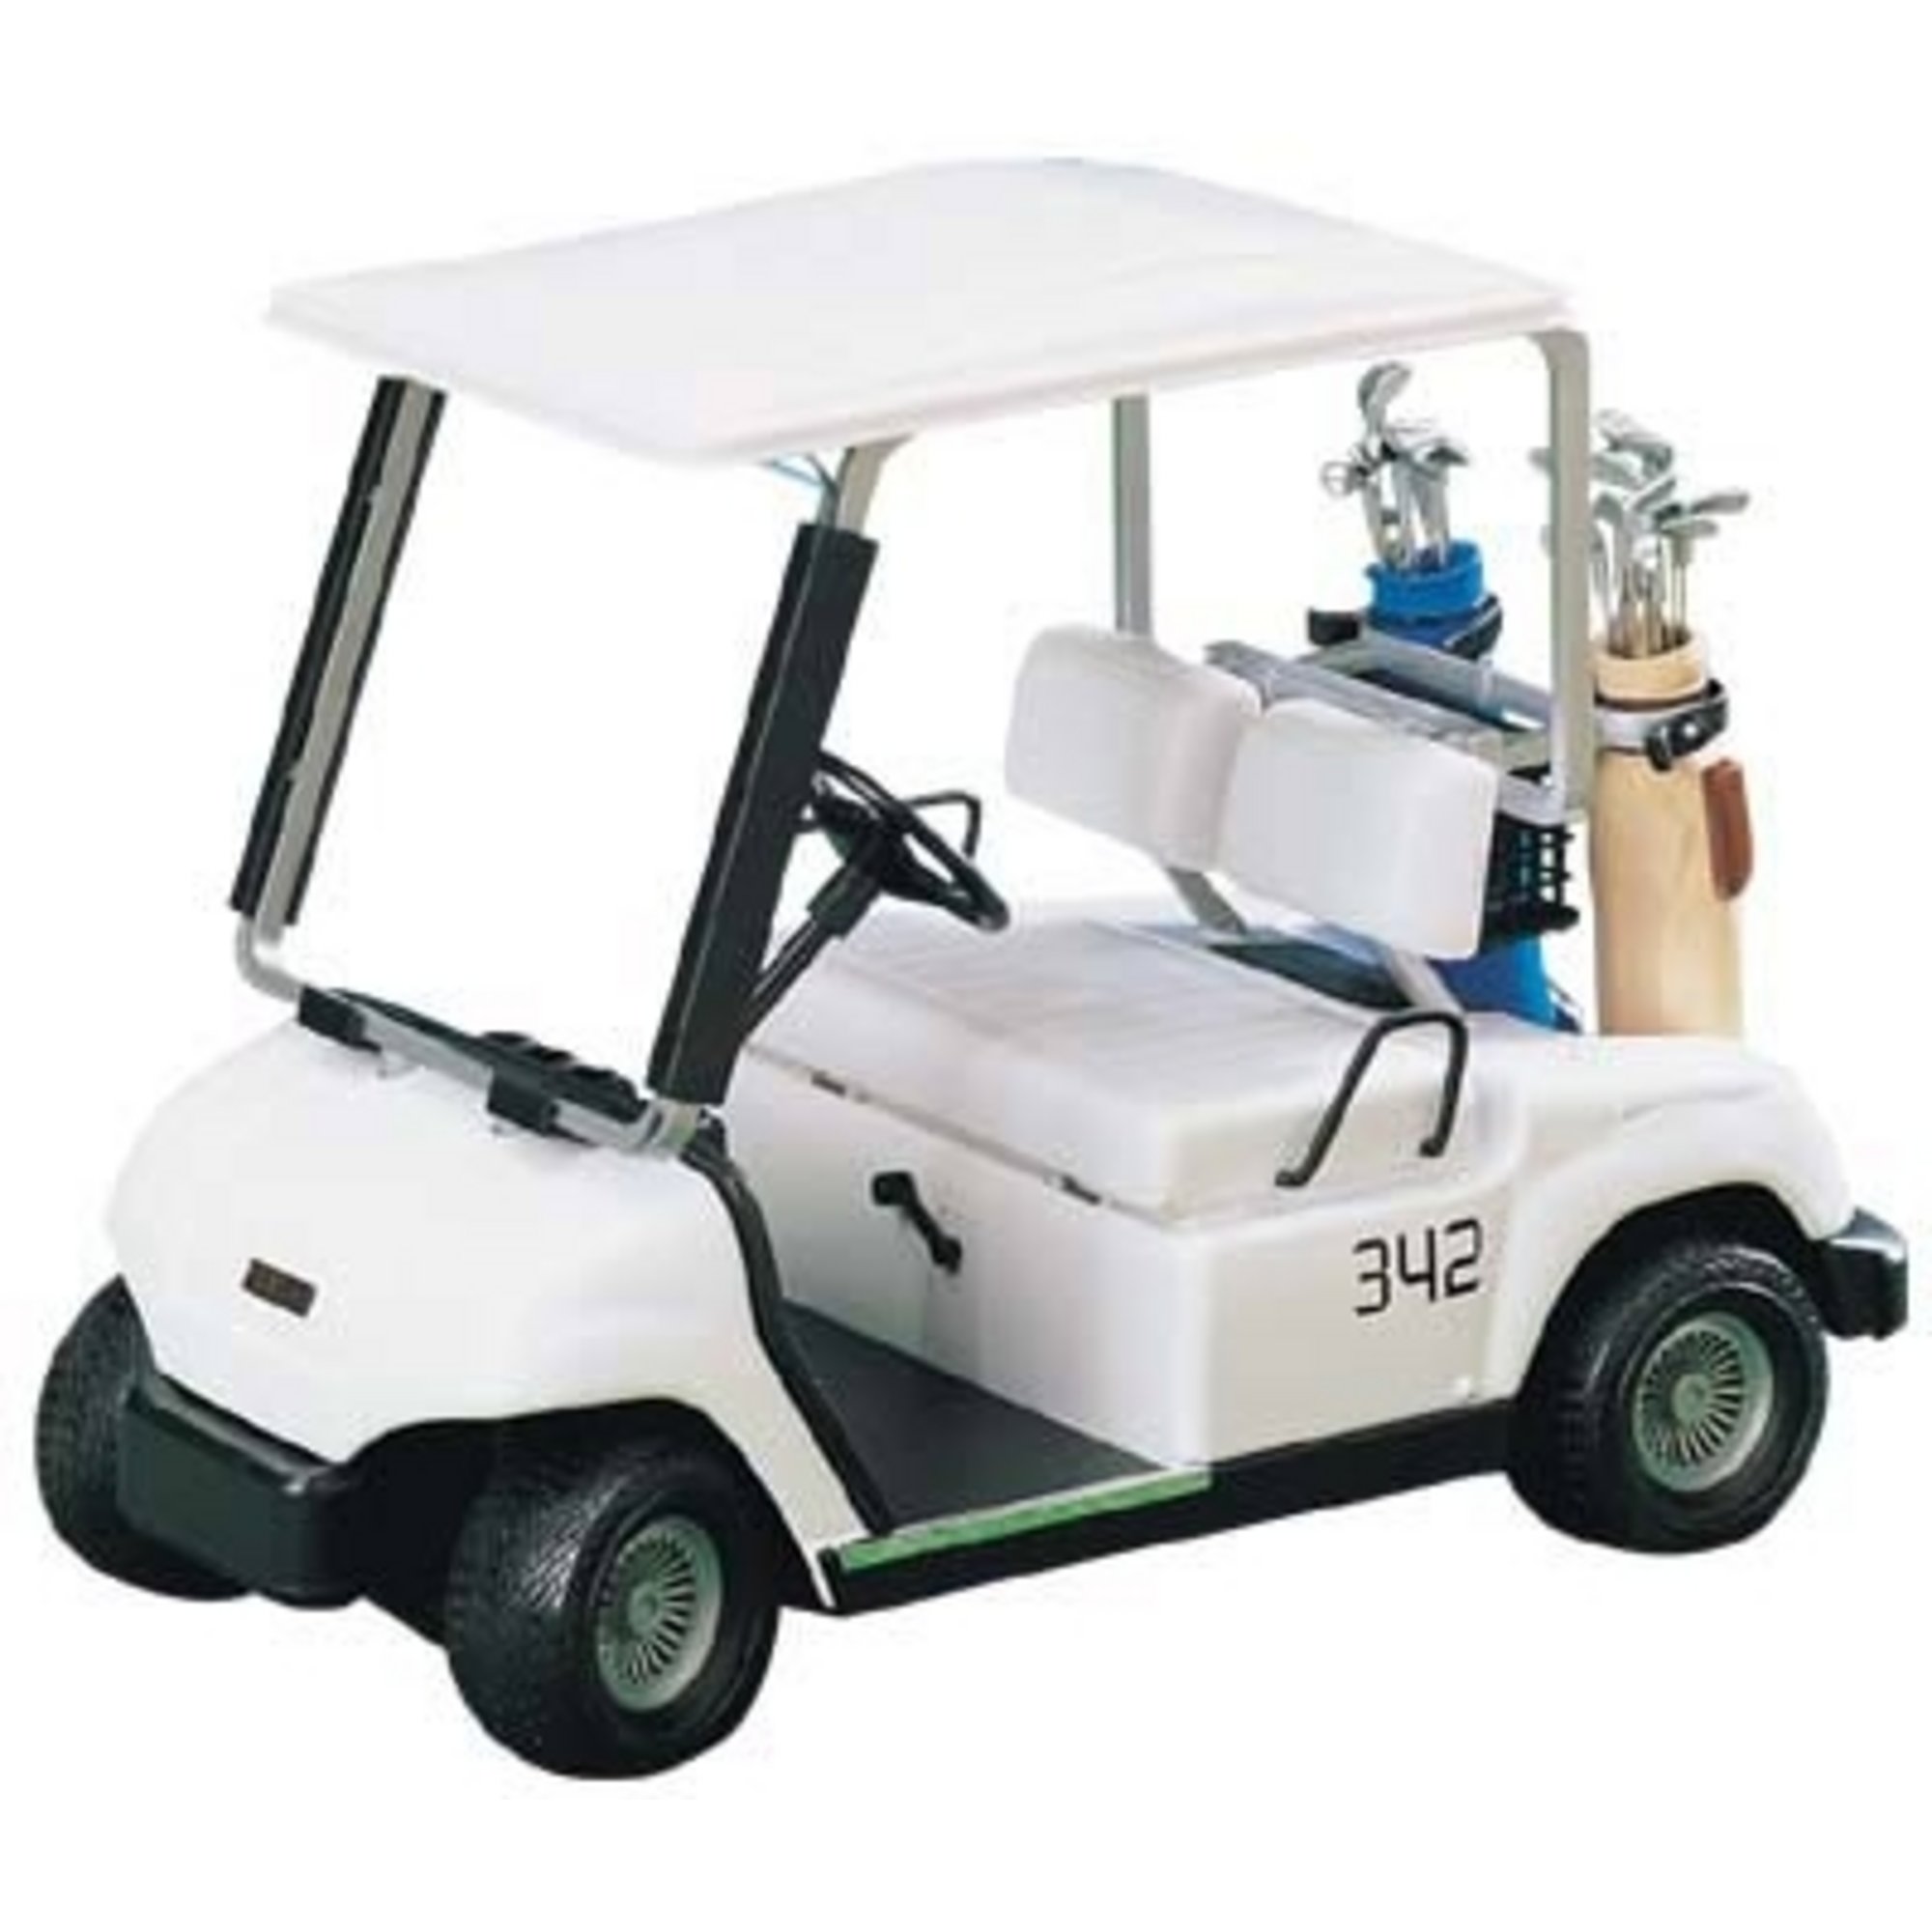 Yamaha Golf Cart Die-Cast Collectible, 1:12 Scale